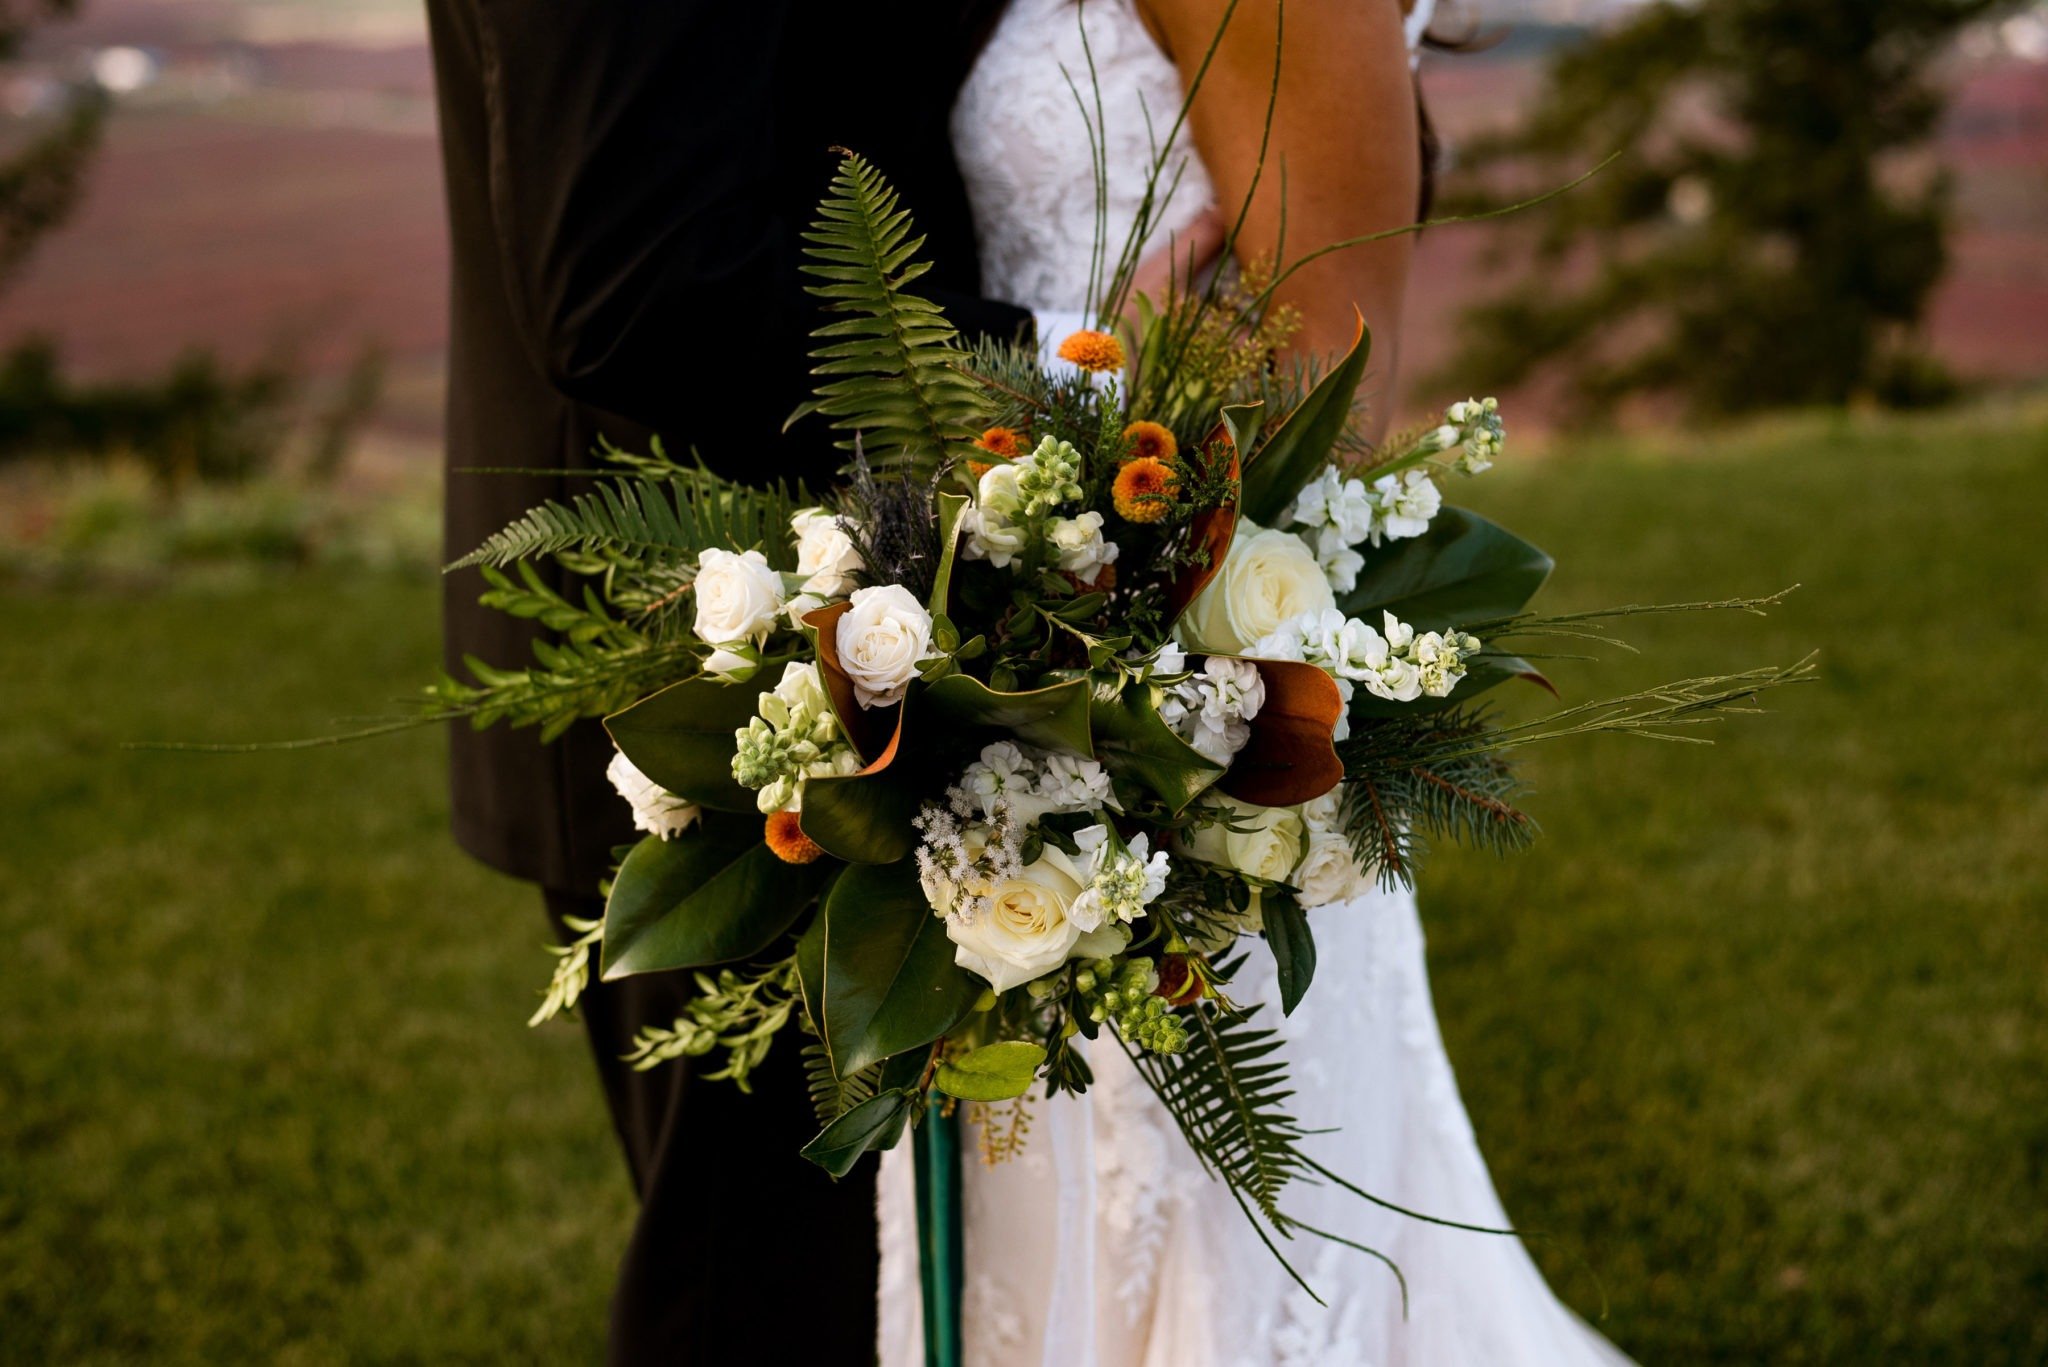 How much should you spend on wedding flowers?